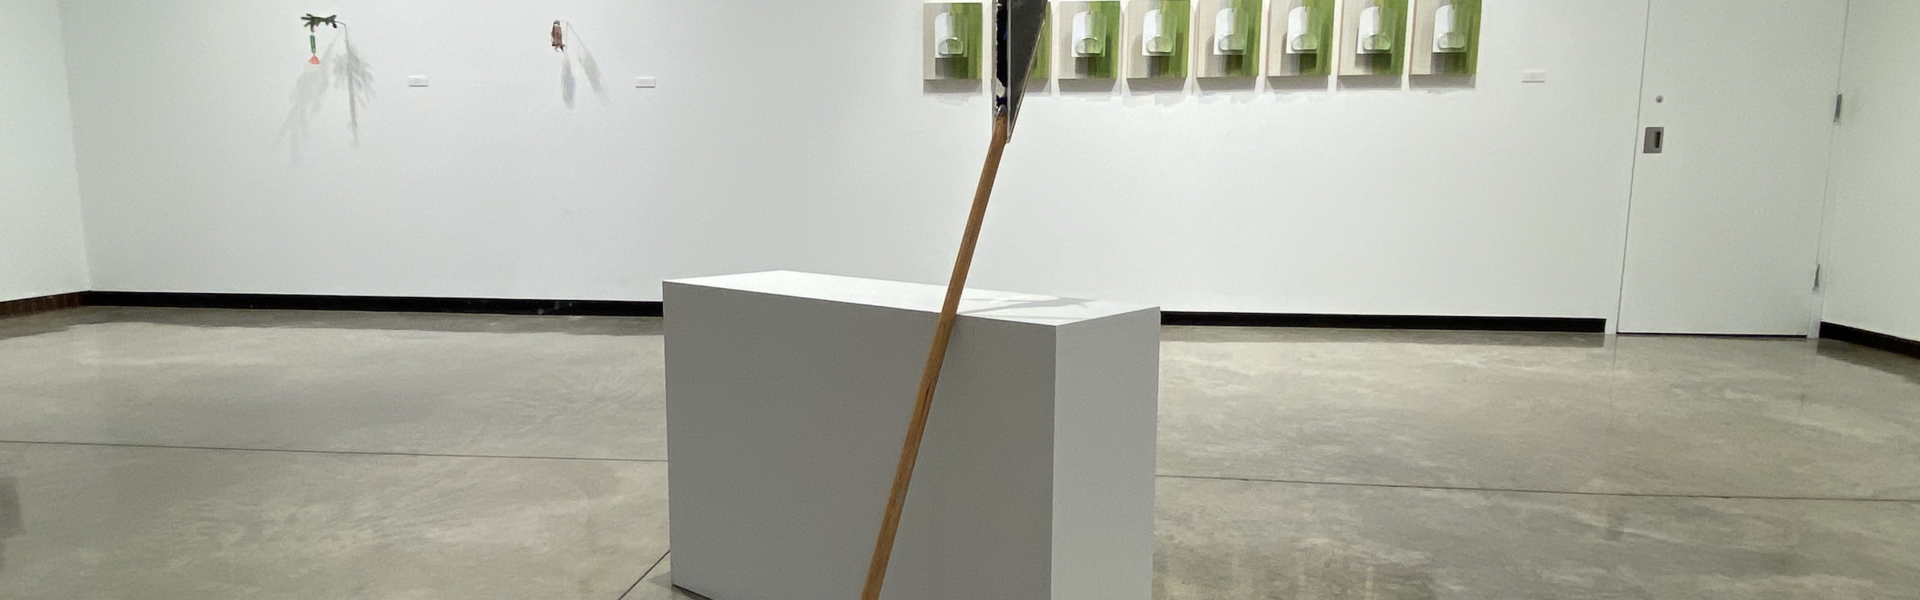 View of "I Make This, You Make That" art exhibition in the Foster Gallery. It shows a sculpture of a broom with a plant growing in a plexi glass container attached to the broom handle.